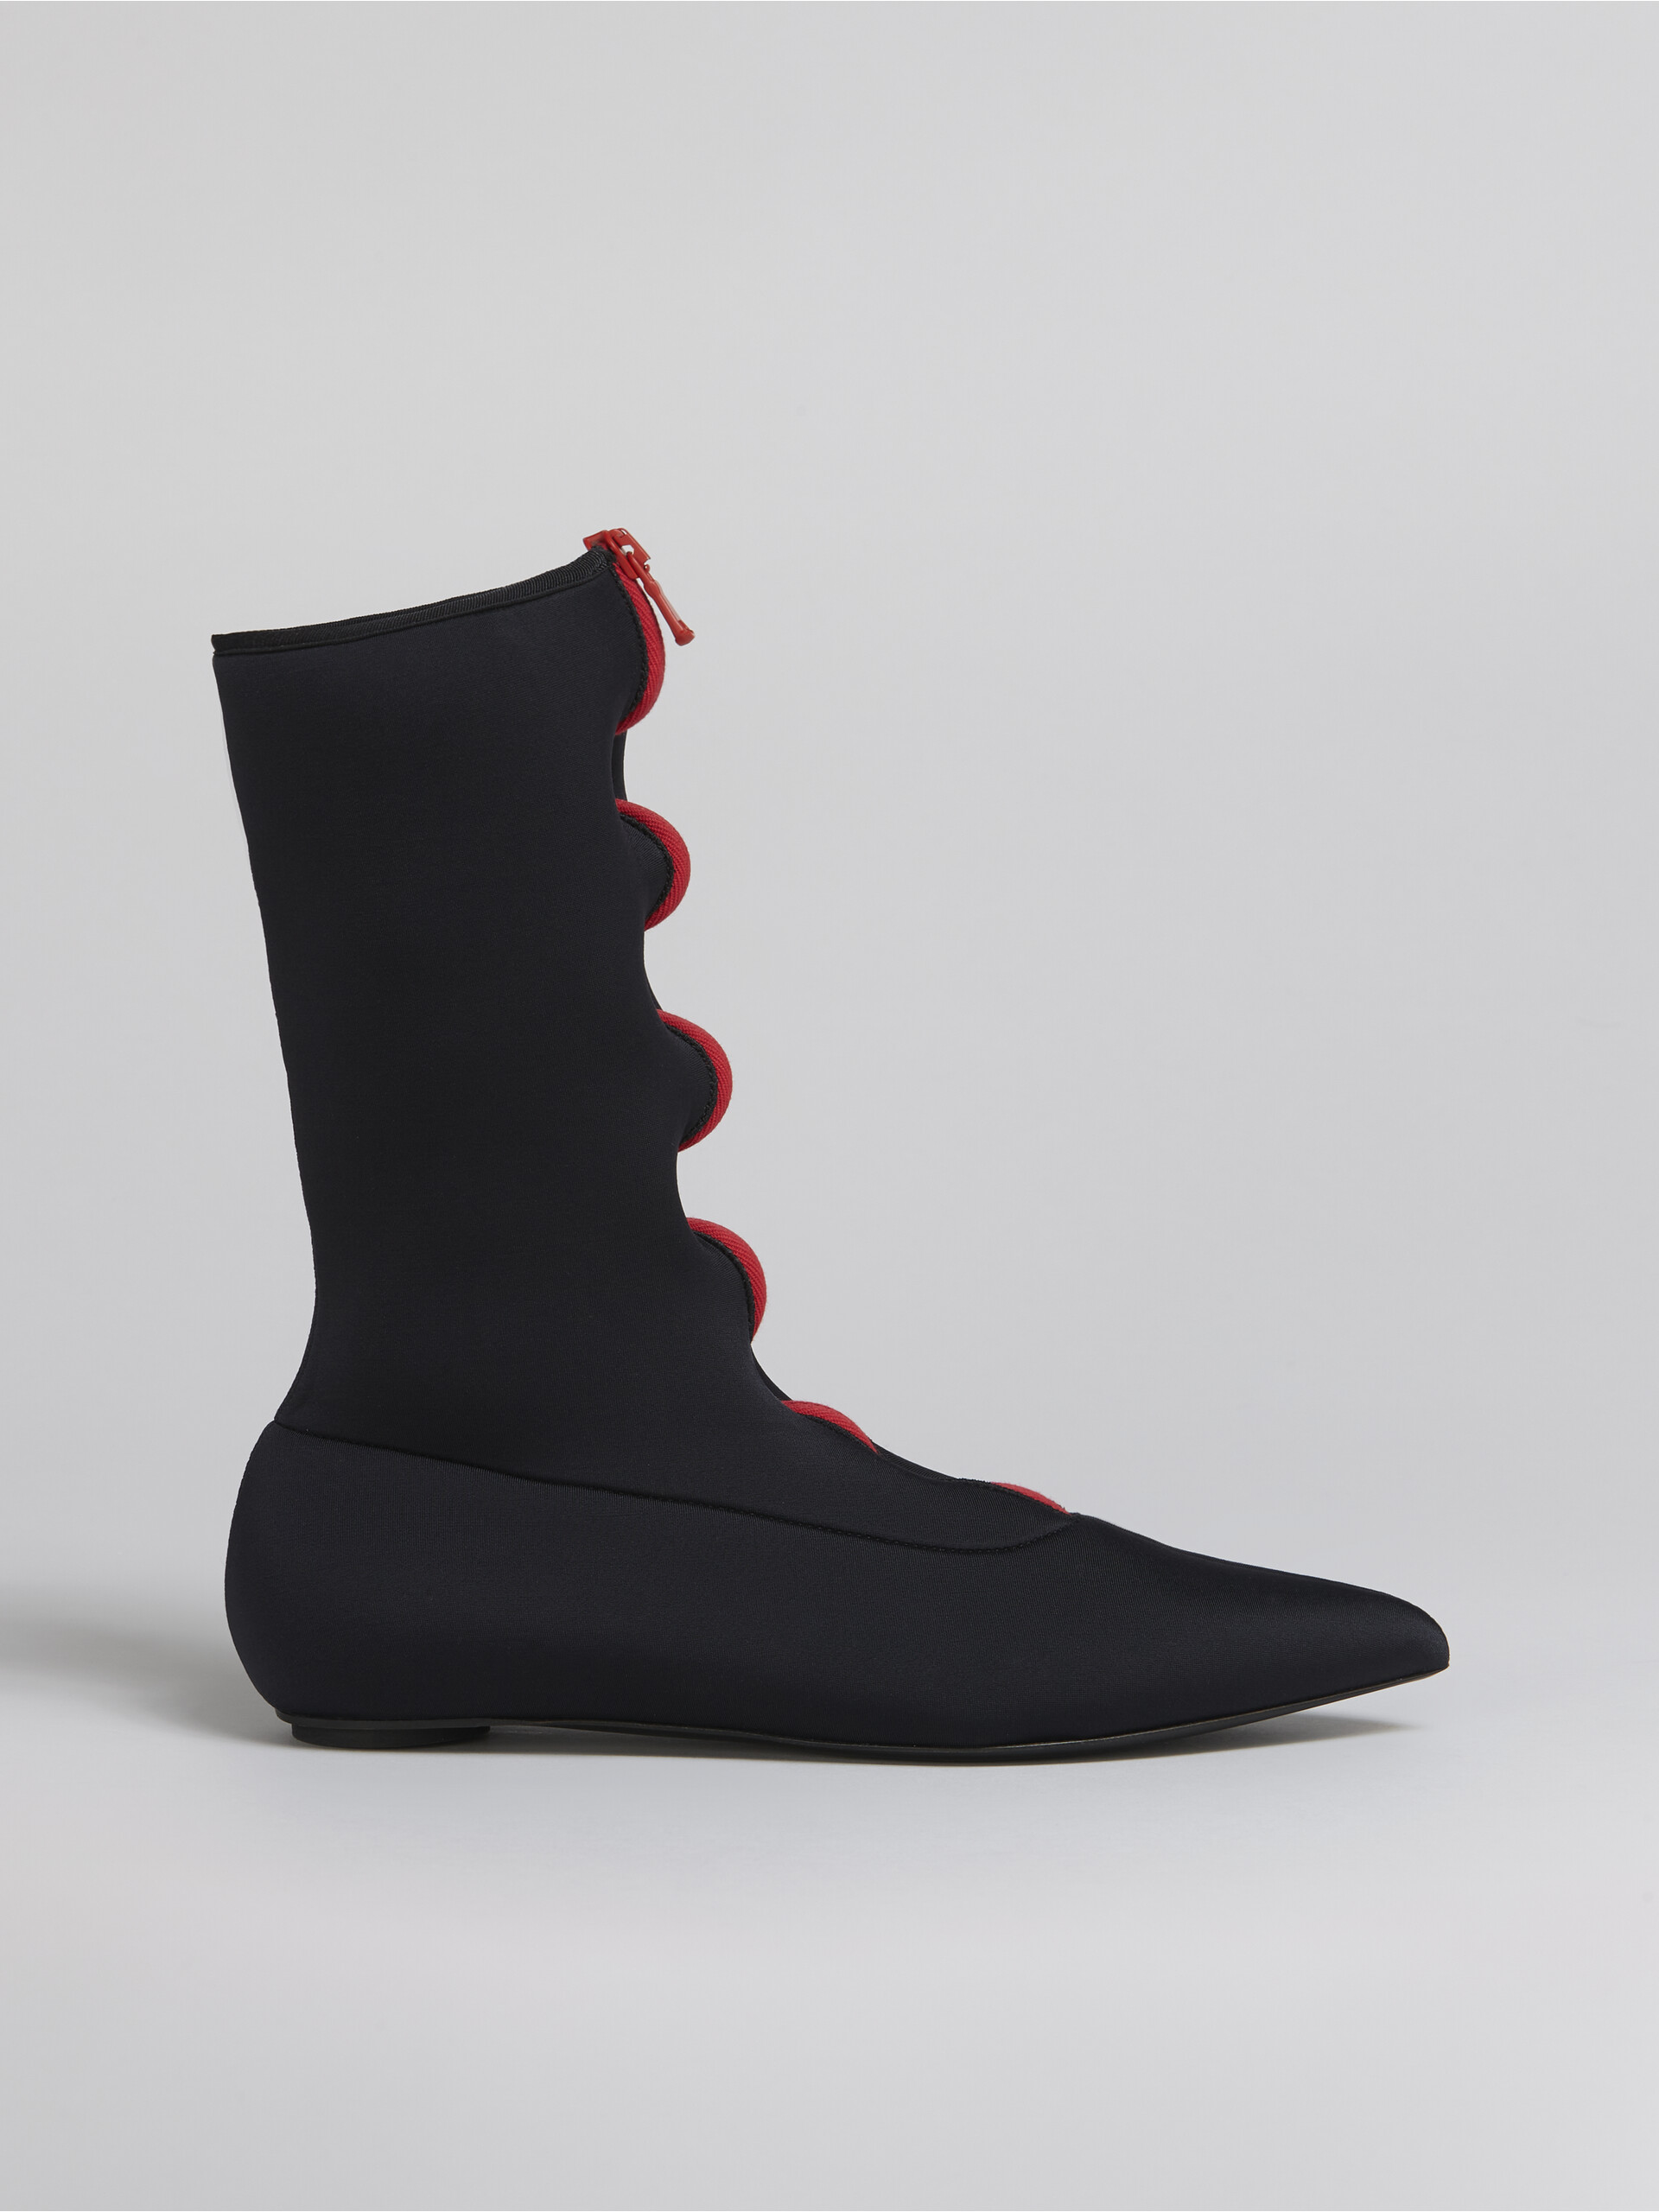 Pointed flat bootie in stretch neoprene - Boots - Image 1